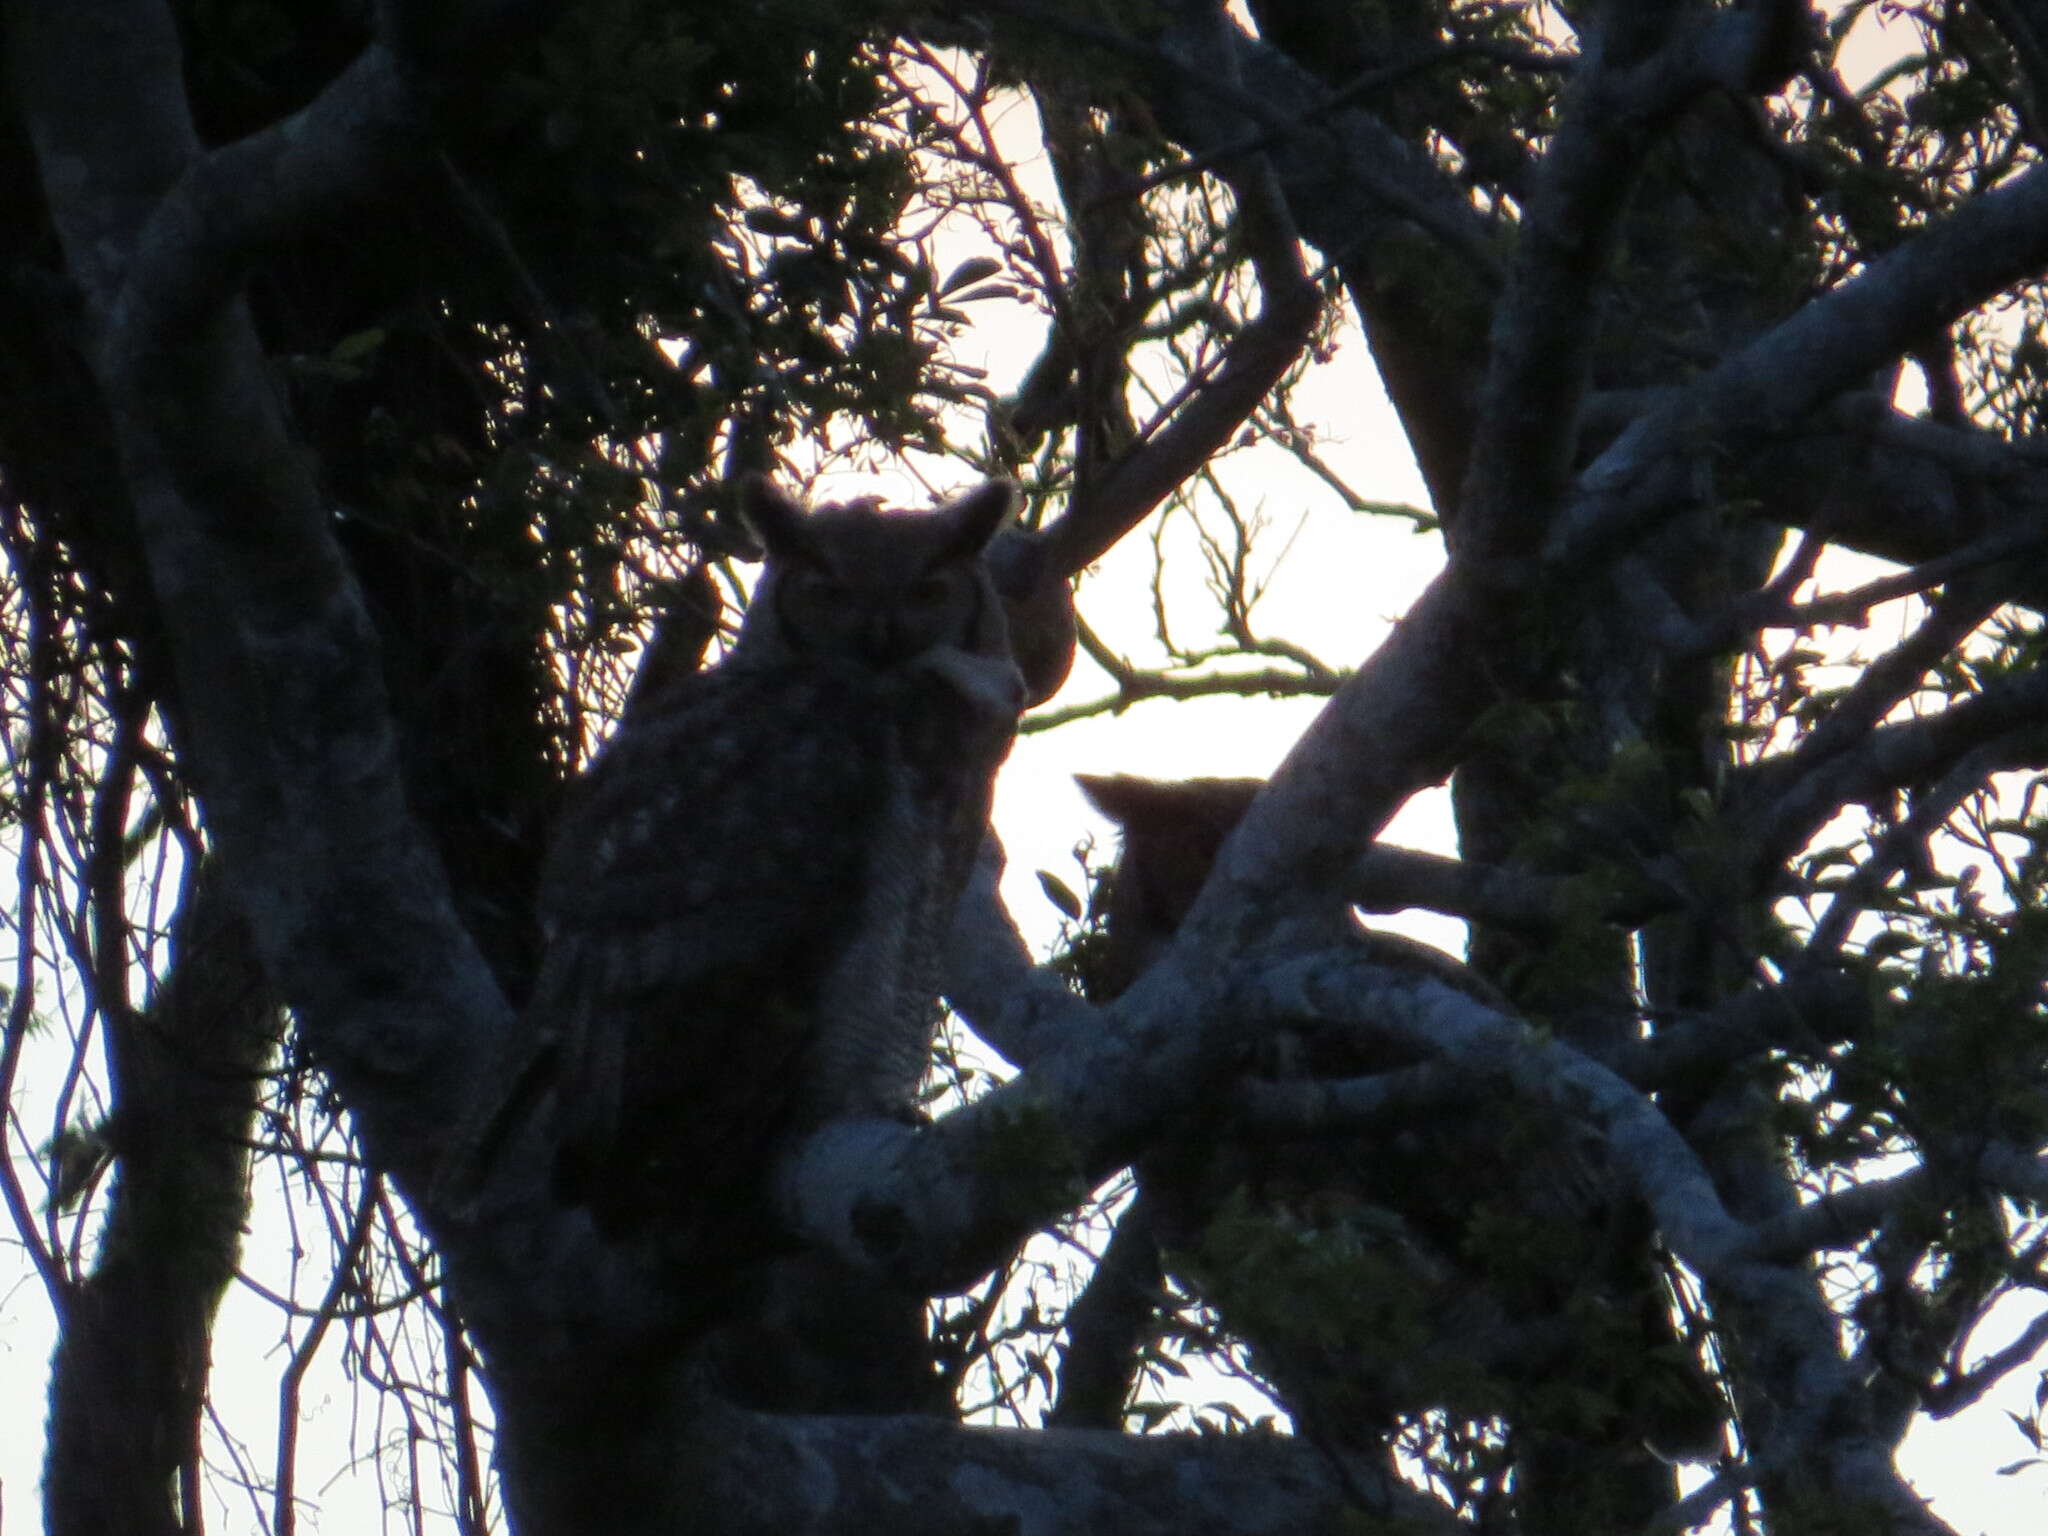 Image of South American Great Horned Owl